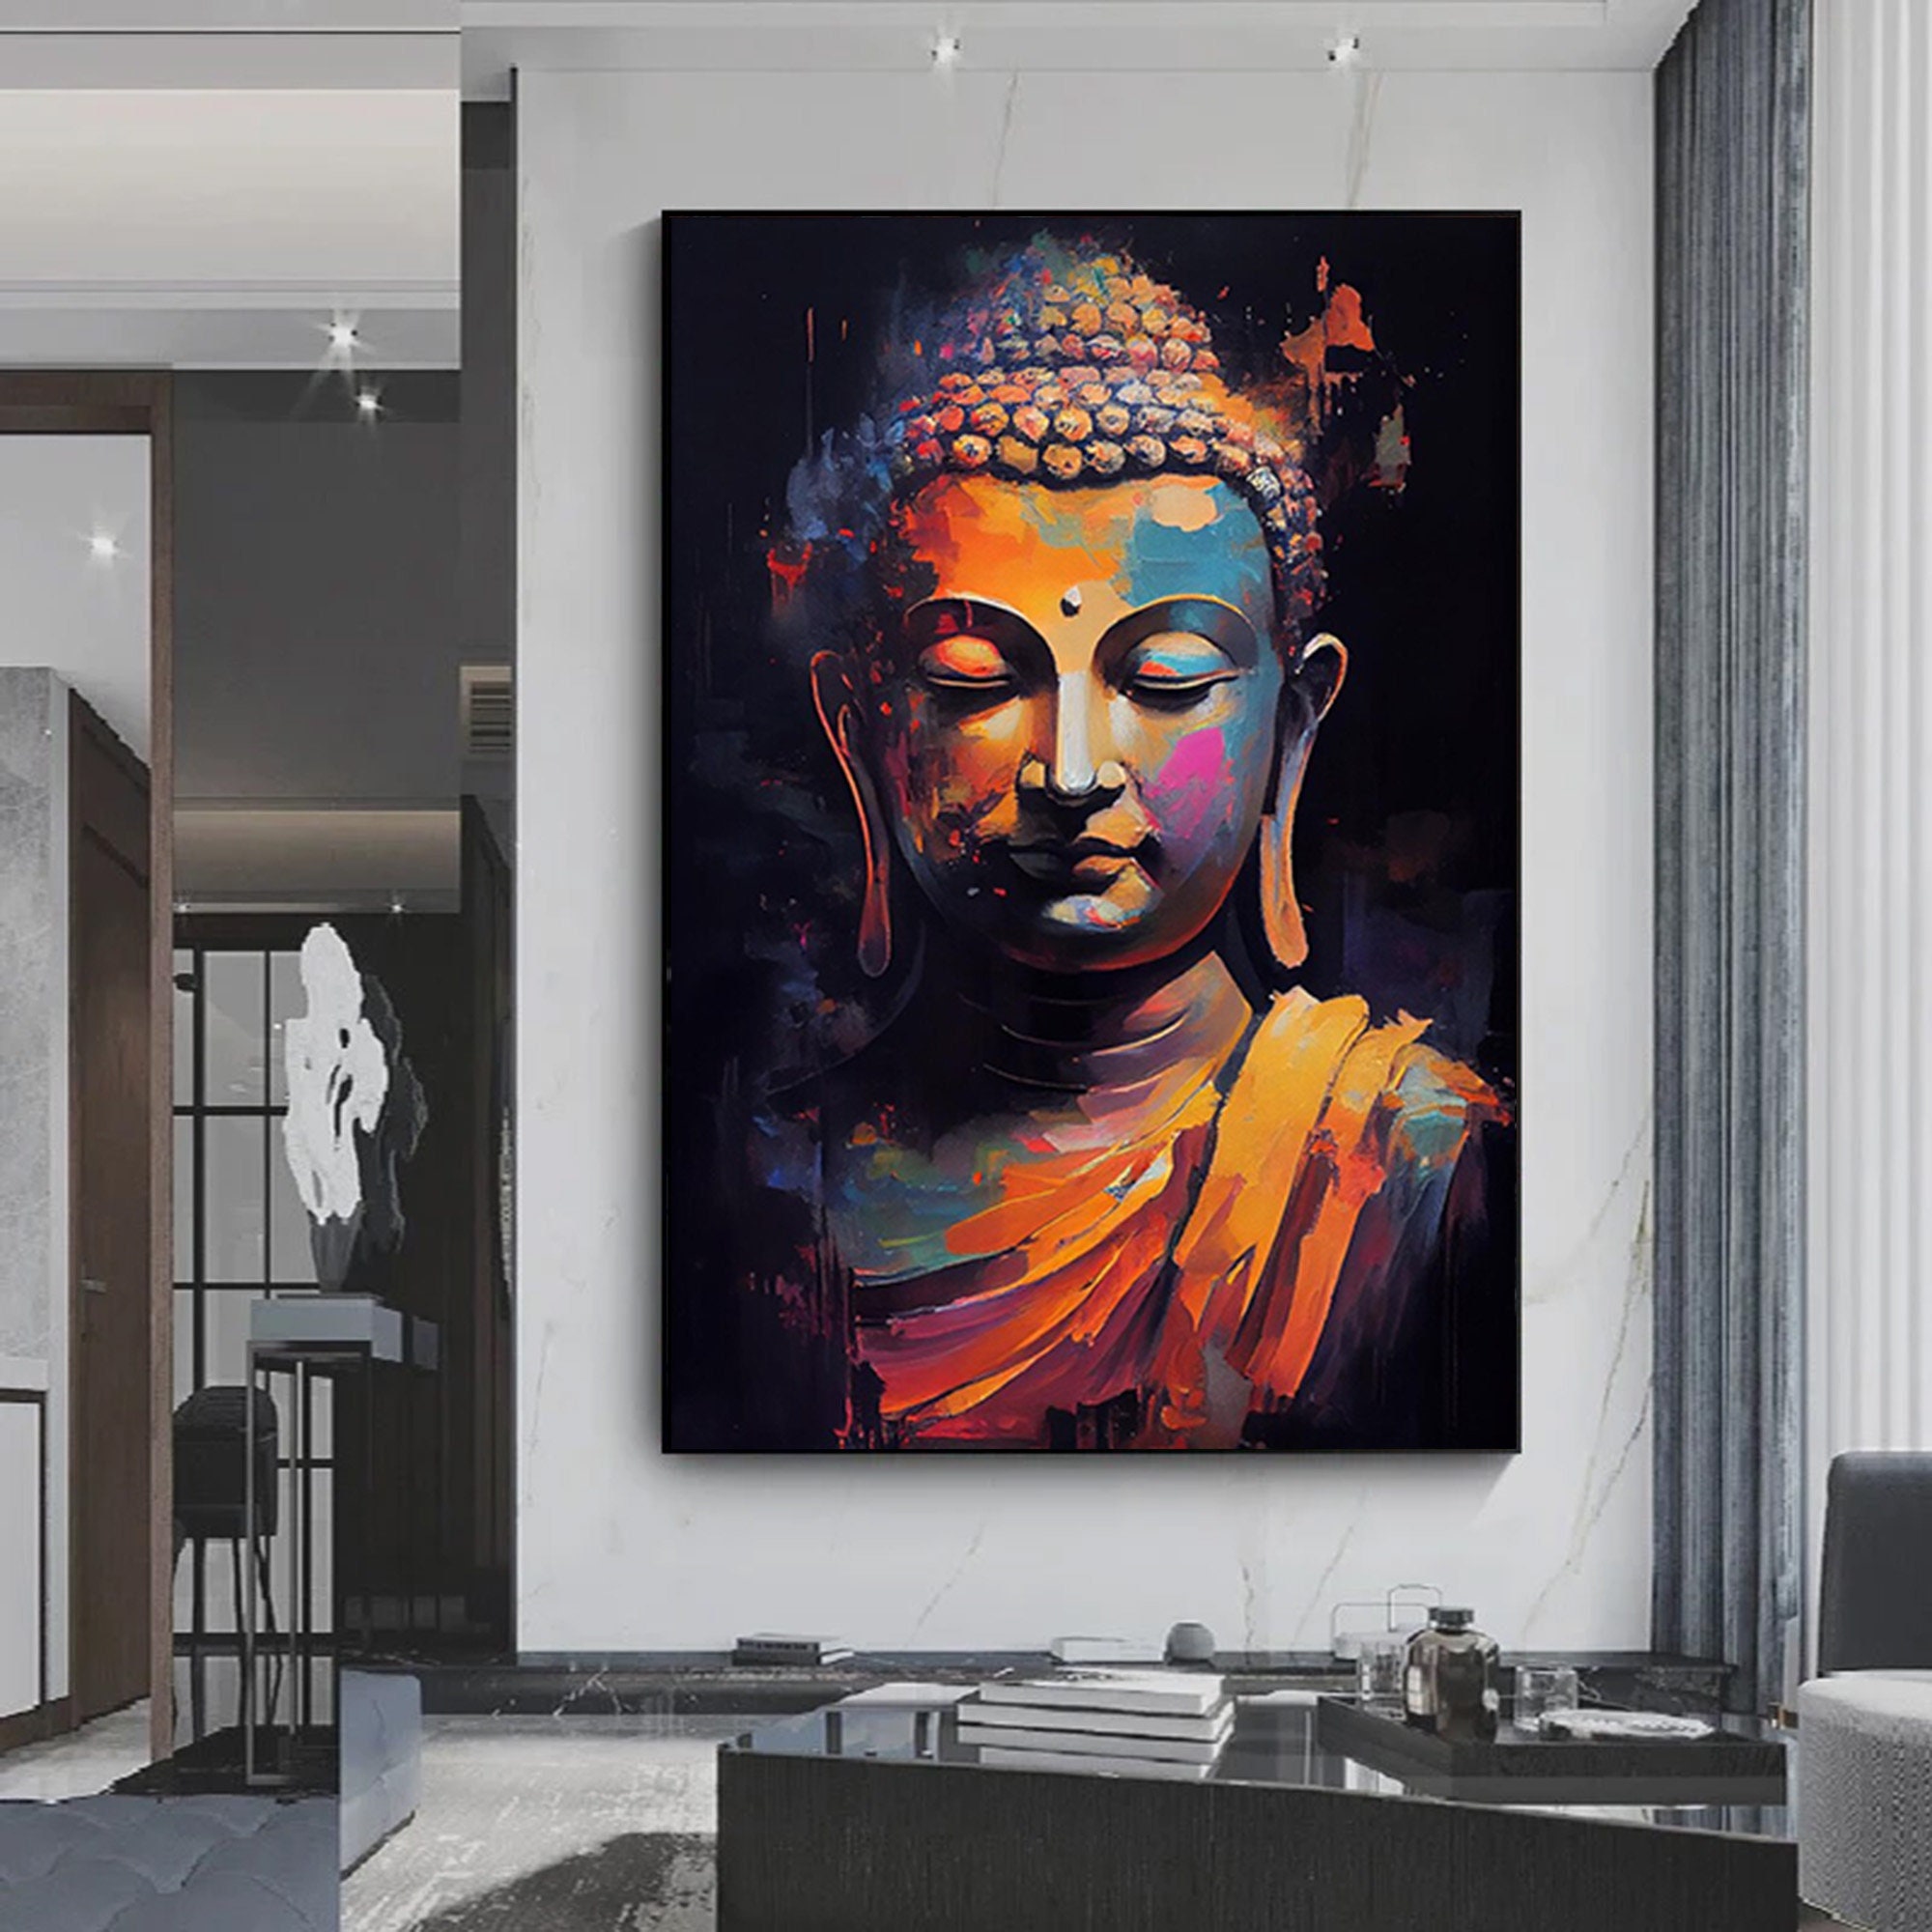  HOLEILUCK Decor Wall Art for Living Room Large Size Decoracion  Salon Casa Canvas Painting Buddha Modern Aesthetic Room Decor  70x180cm/28x71in Unframed Wall Canvas Art: Posters & Prints